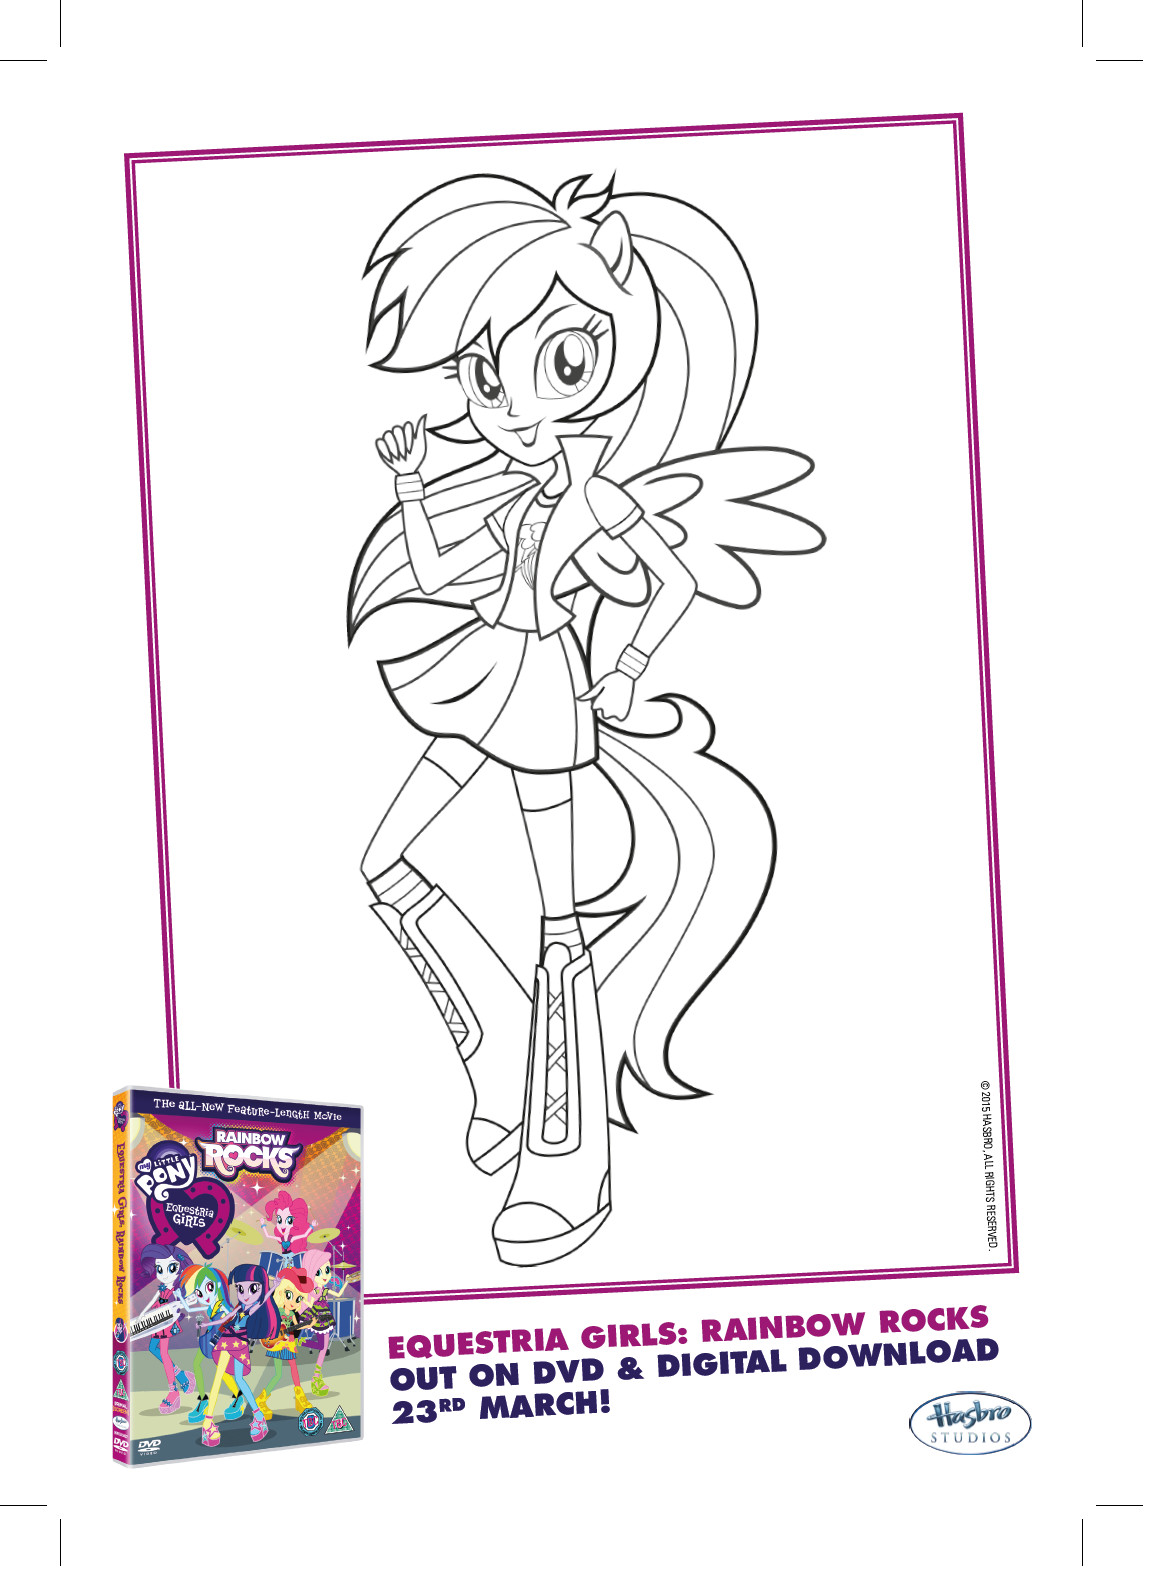 Equestria Girls Rainbow Dash Coloring Pages
 Image Rainbow Dash Rainbow Rocks coloring page My